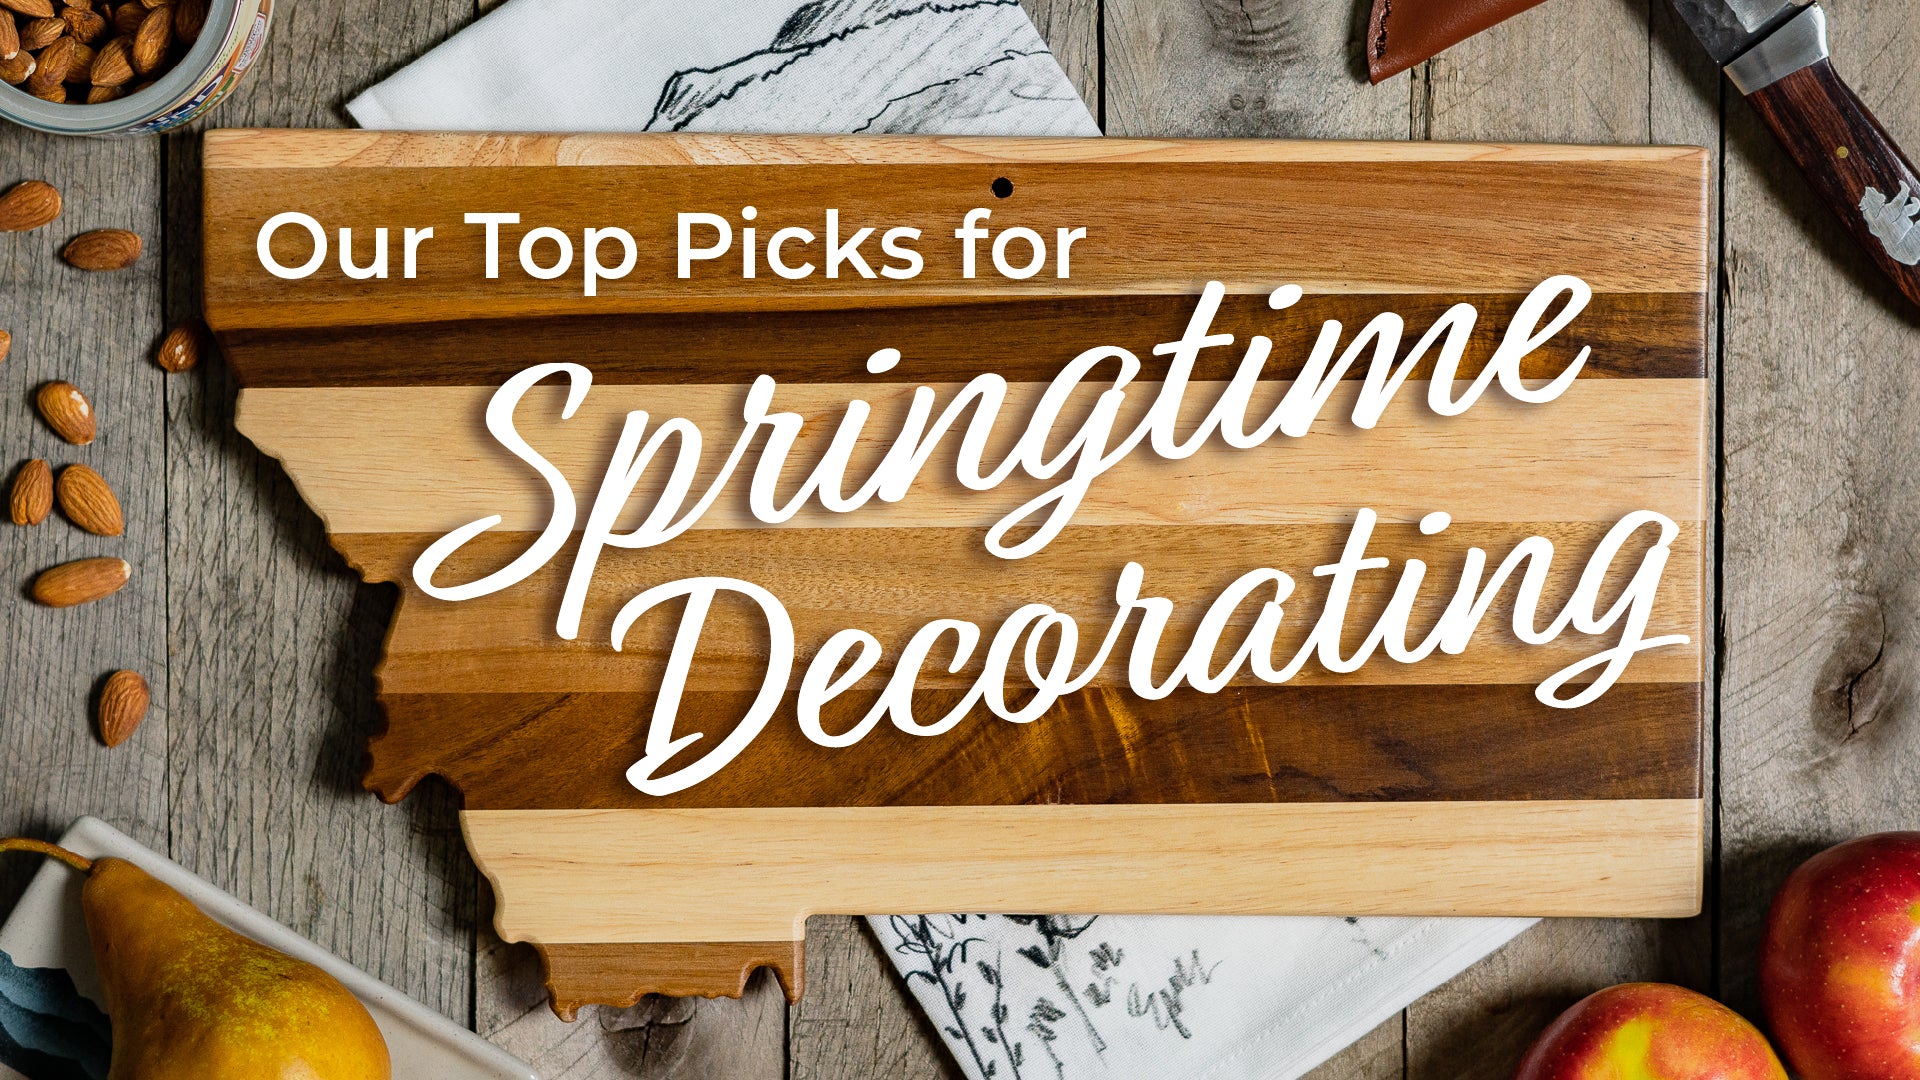 Our Top Picks for Springtime Decorating - Montana Gift Corral